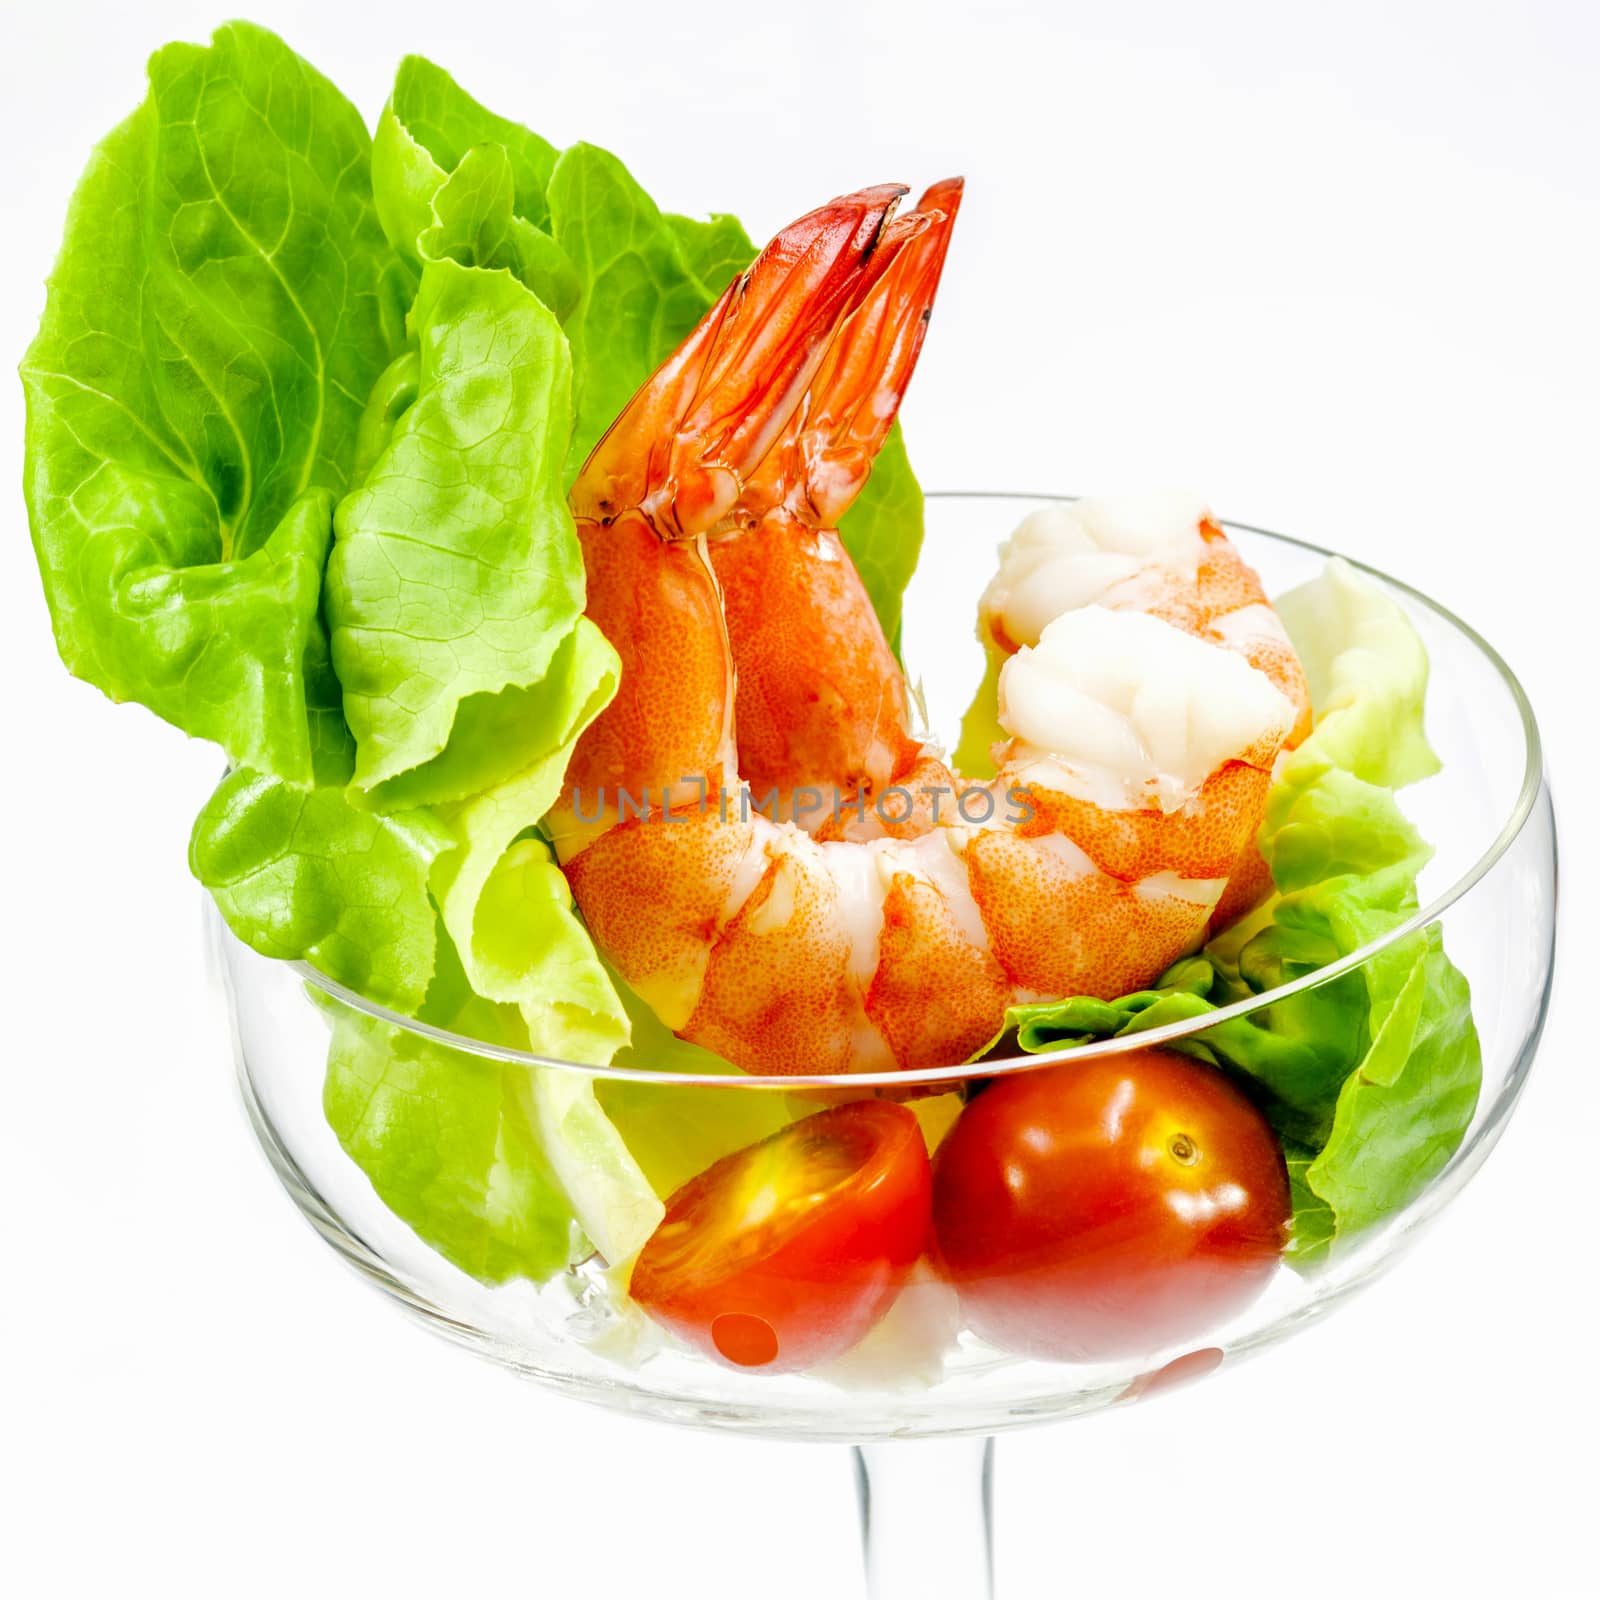 Fresh steamed  prawns with vegetable salad isolate on white background. Boiled , shrimp with mixed green salad . Selective focus depth of field.